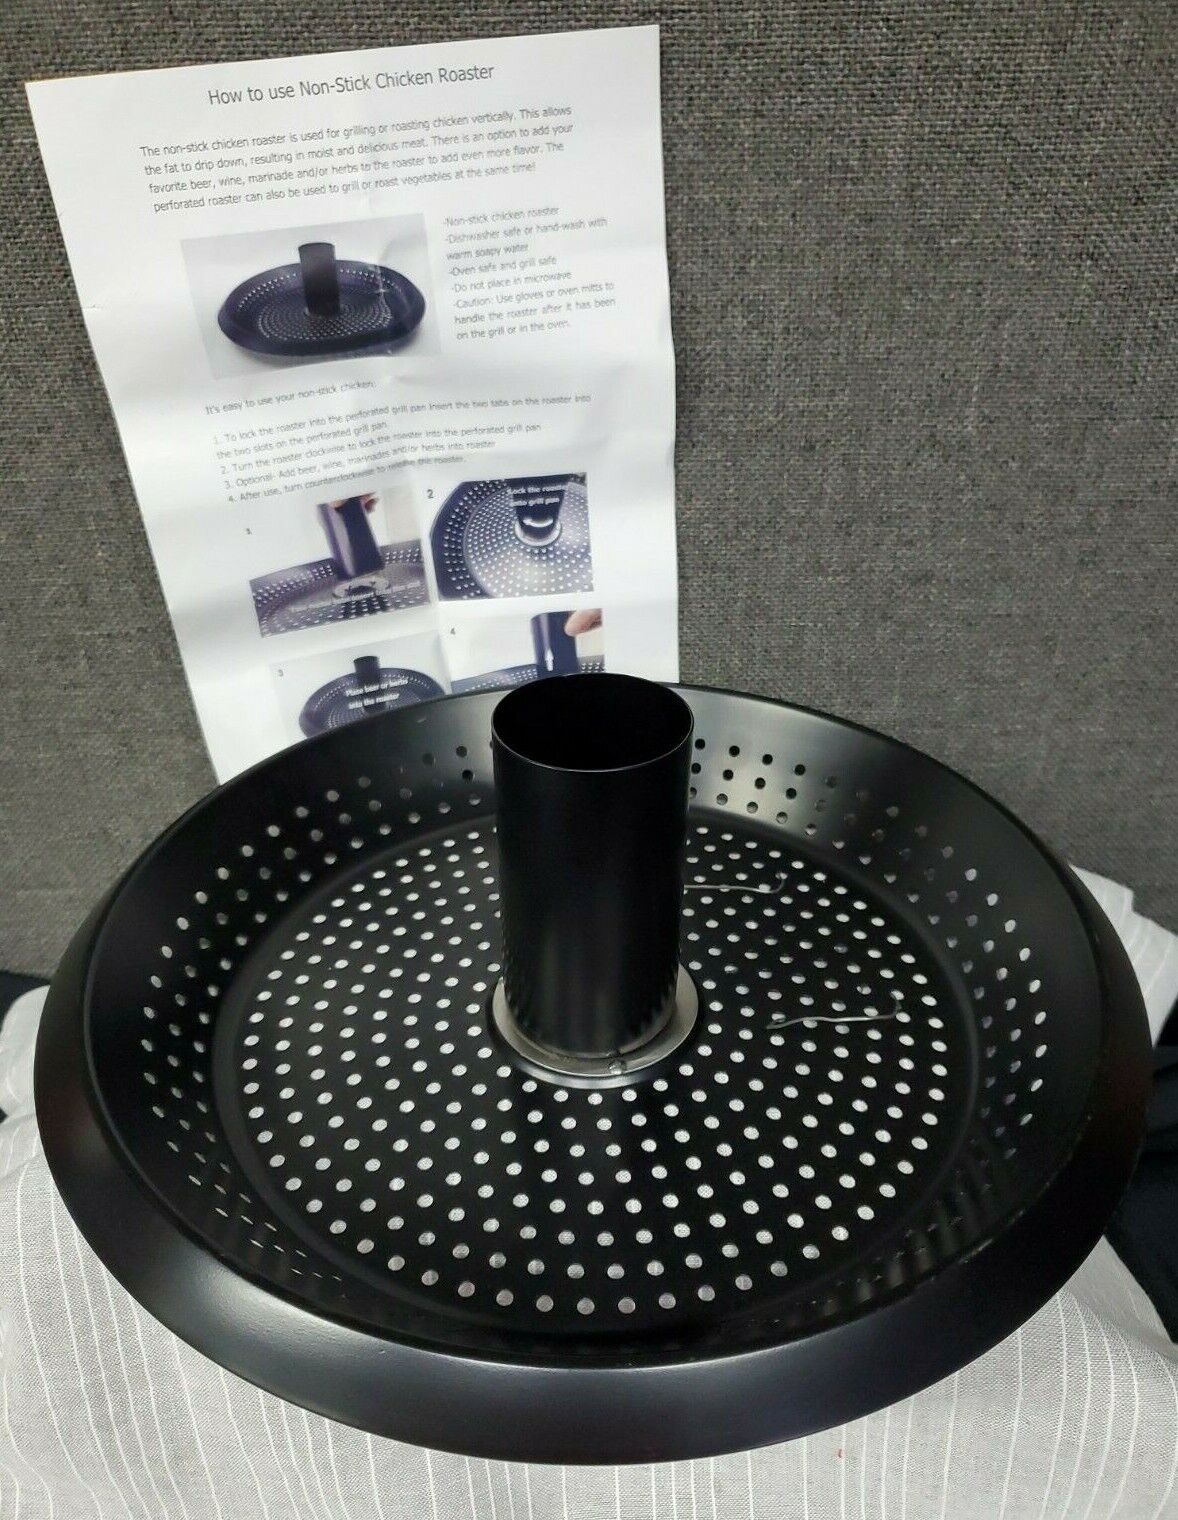 https://bndtreasurechest.com/wp-content/uploads/imported/0/70/Made-By-Design-Non-Stick-Vertical-Chicken-Roaster-Perforated-Grill-Pan-New-265645731570.jpg